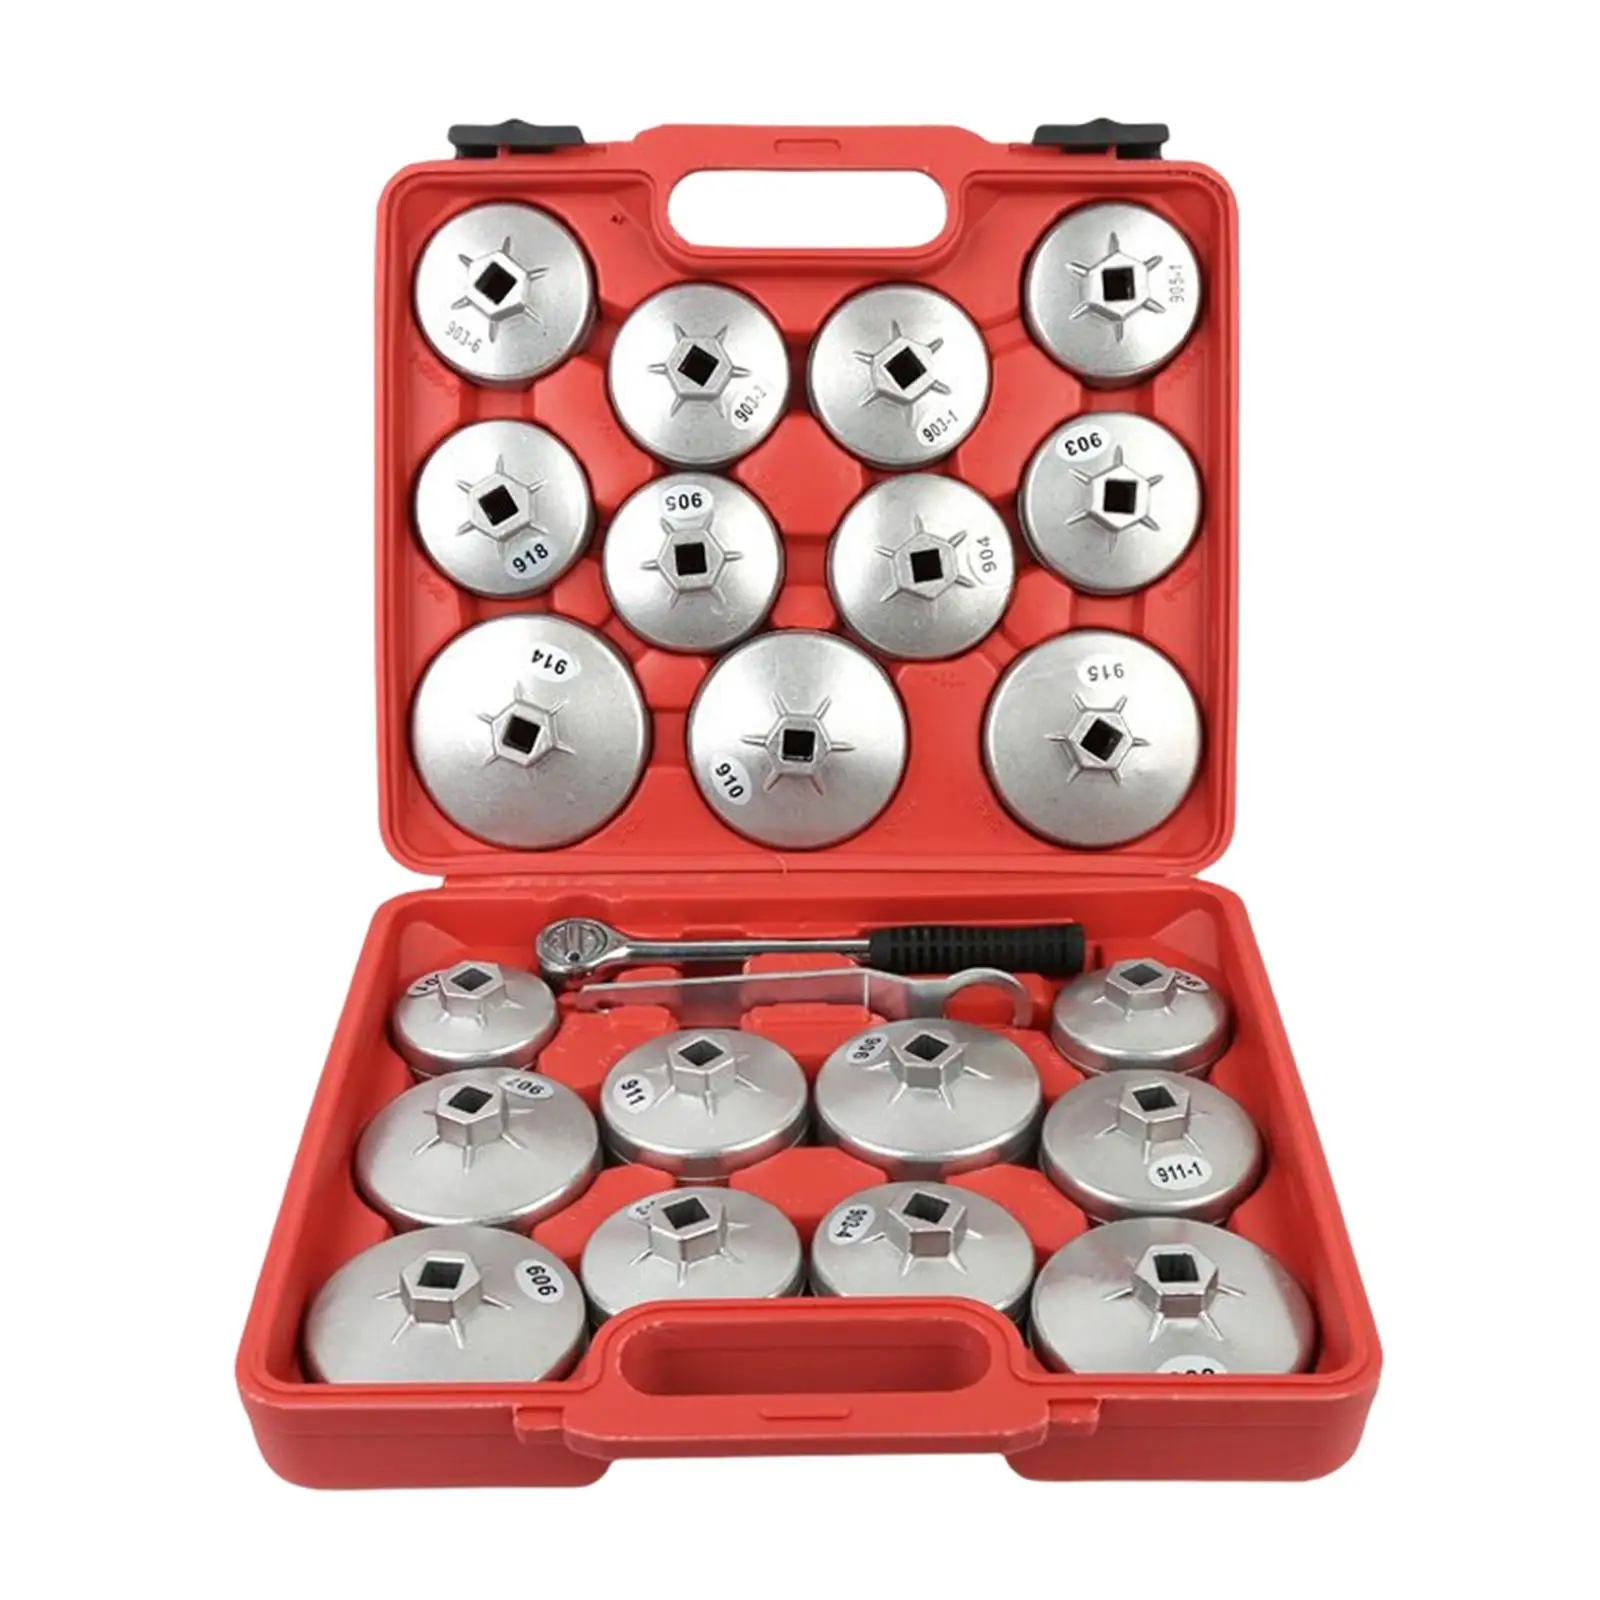 23Pcs Oil Filter Wrench Cup Set with Storage Case Silver Wrench Remover Fit for Audi Auto 901-915 Aluminium Alloy Car Supplies